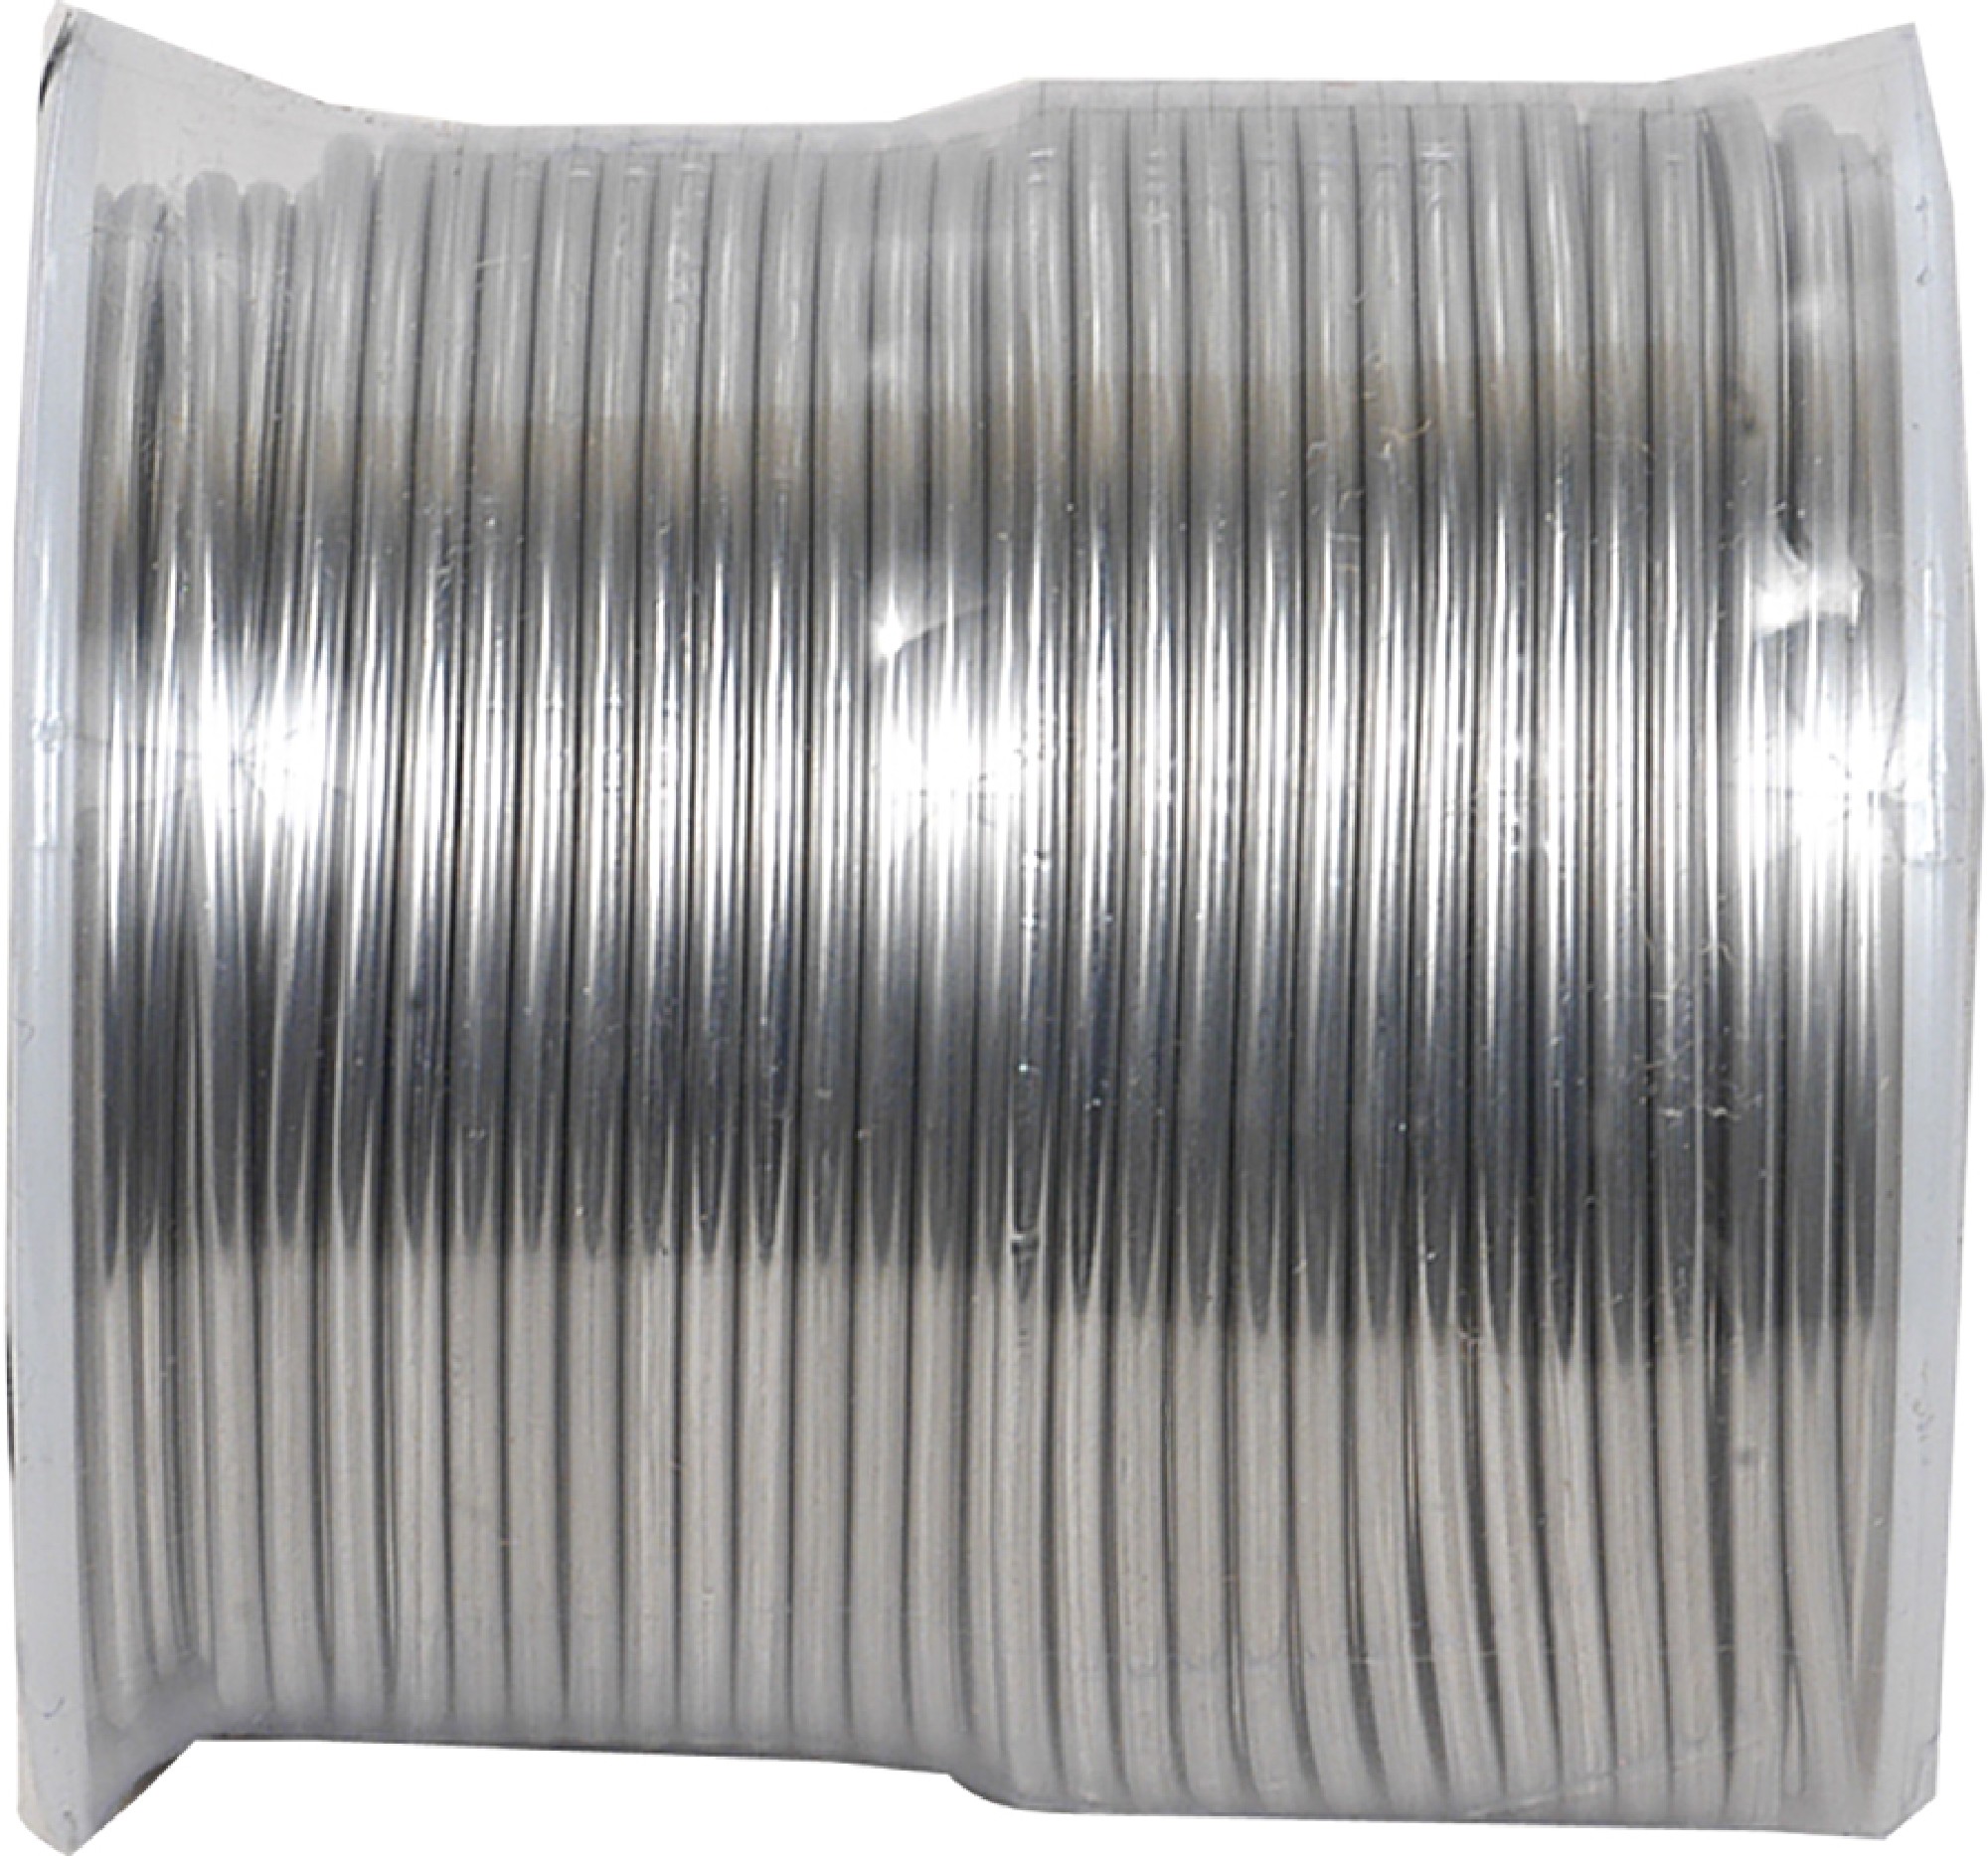 DB Electrical 900-20010 Solder, 60/40; 0.062 Wire Diameter; 1lb Spool for Universal 900-20010